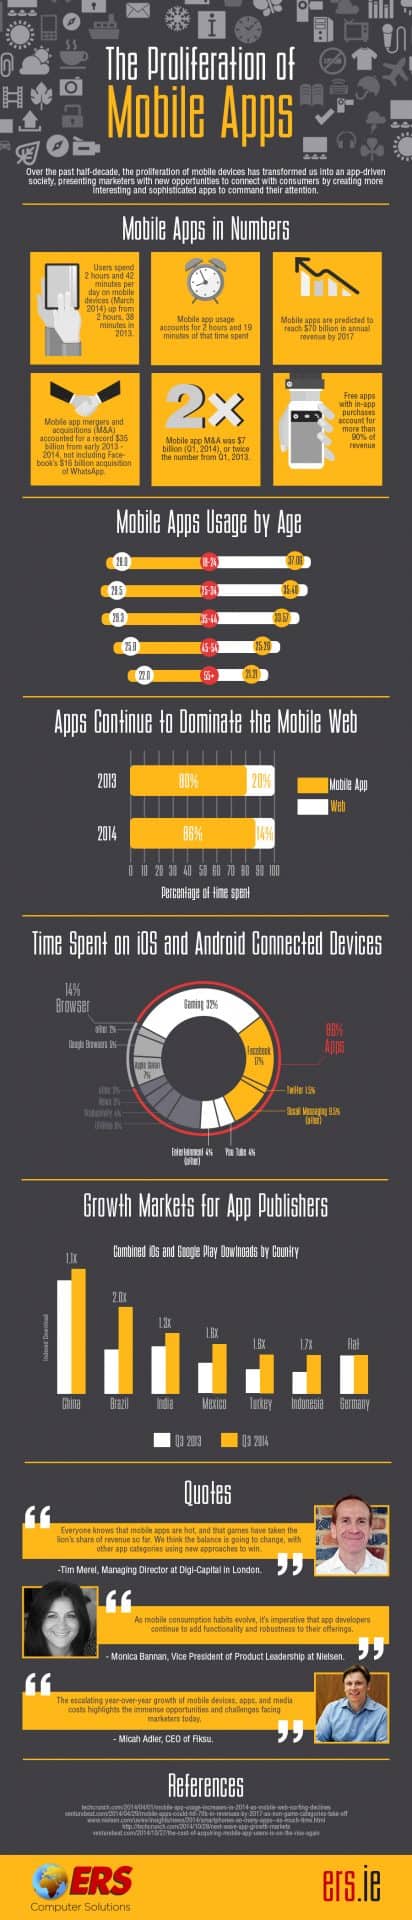 Mobile-Apps-Infographic